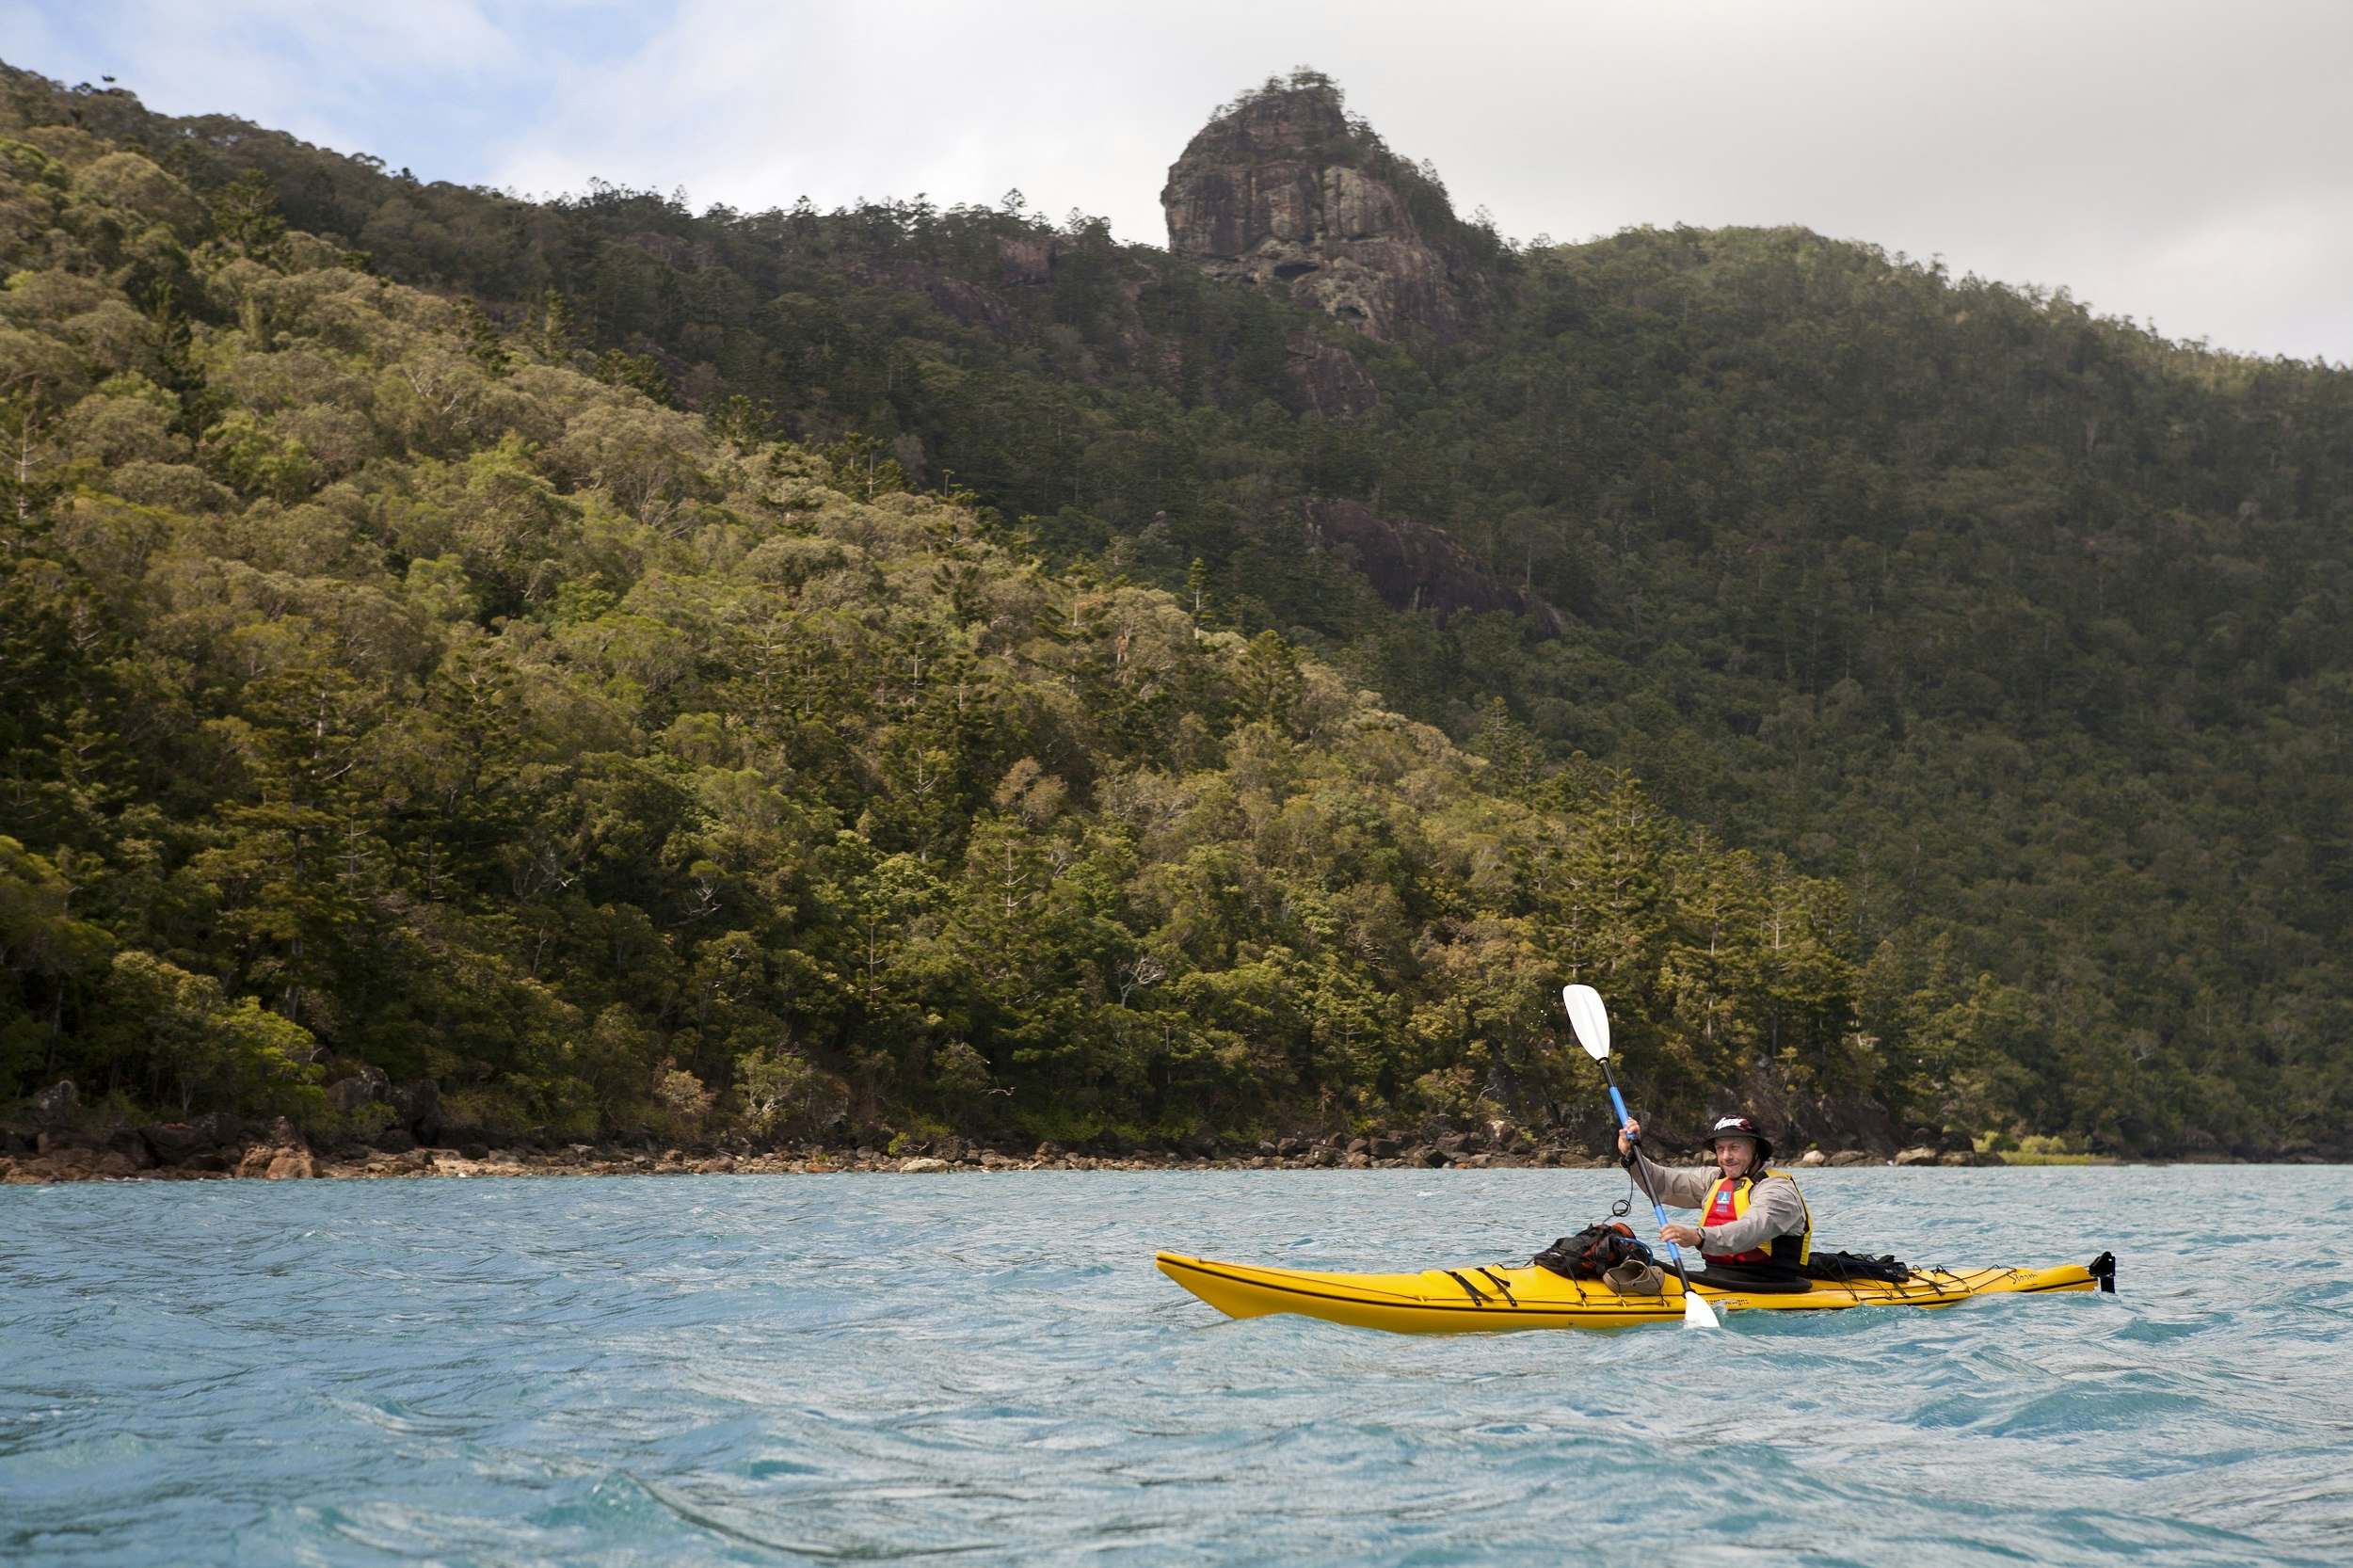 A man paddles a yellow sea kayak across choppy waters with a forested island of the Whitsundays in the background.